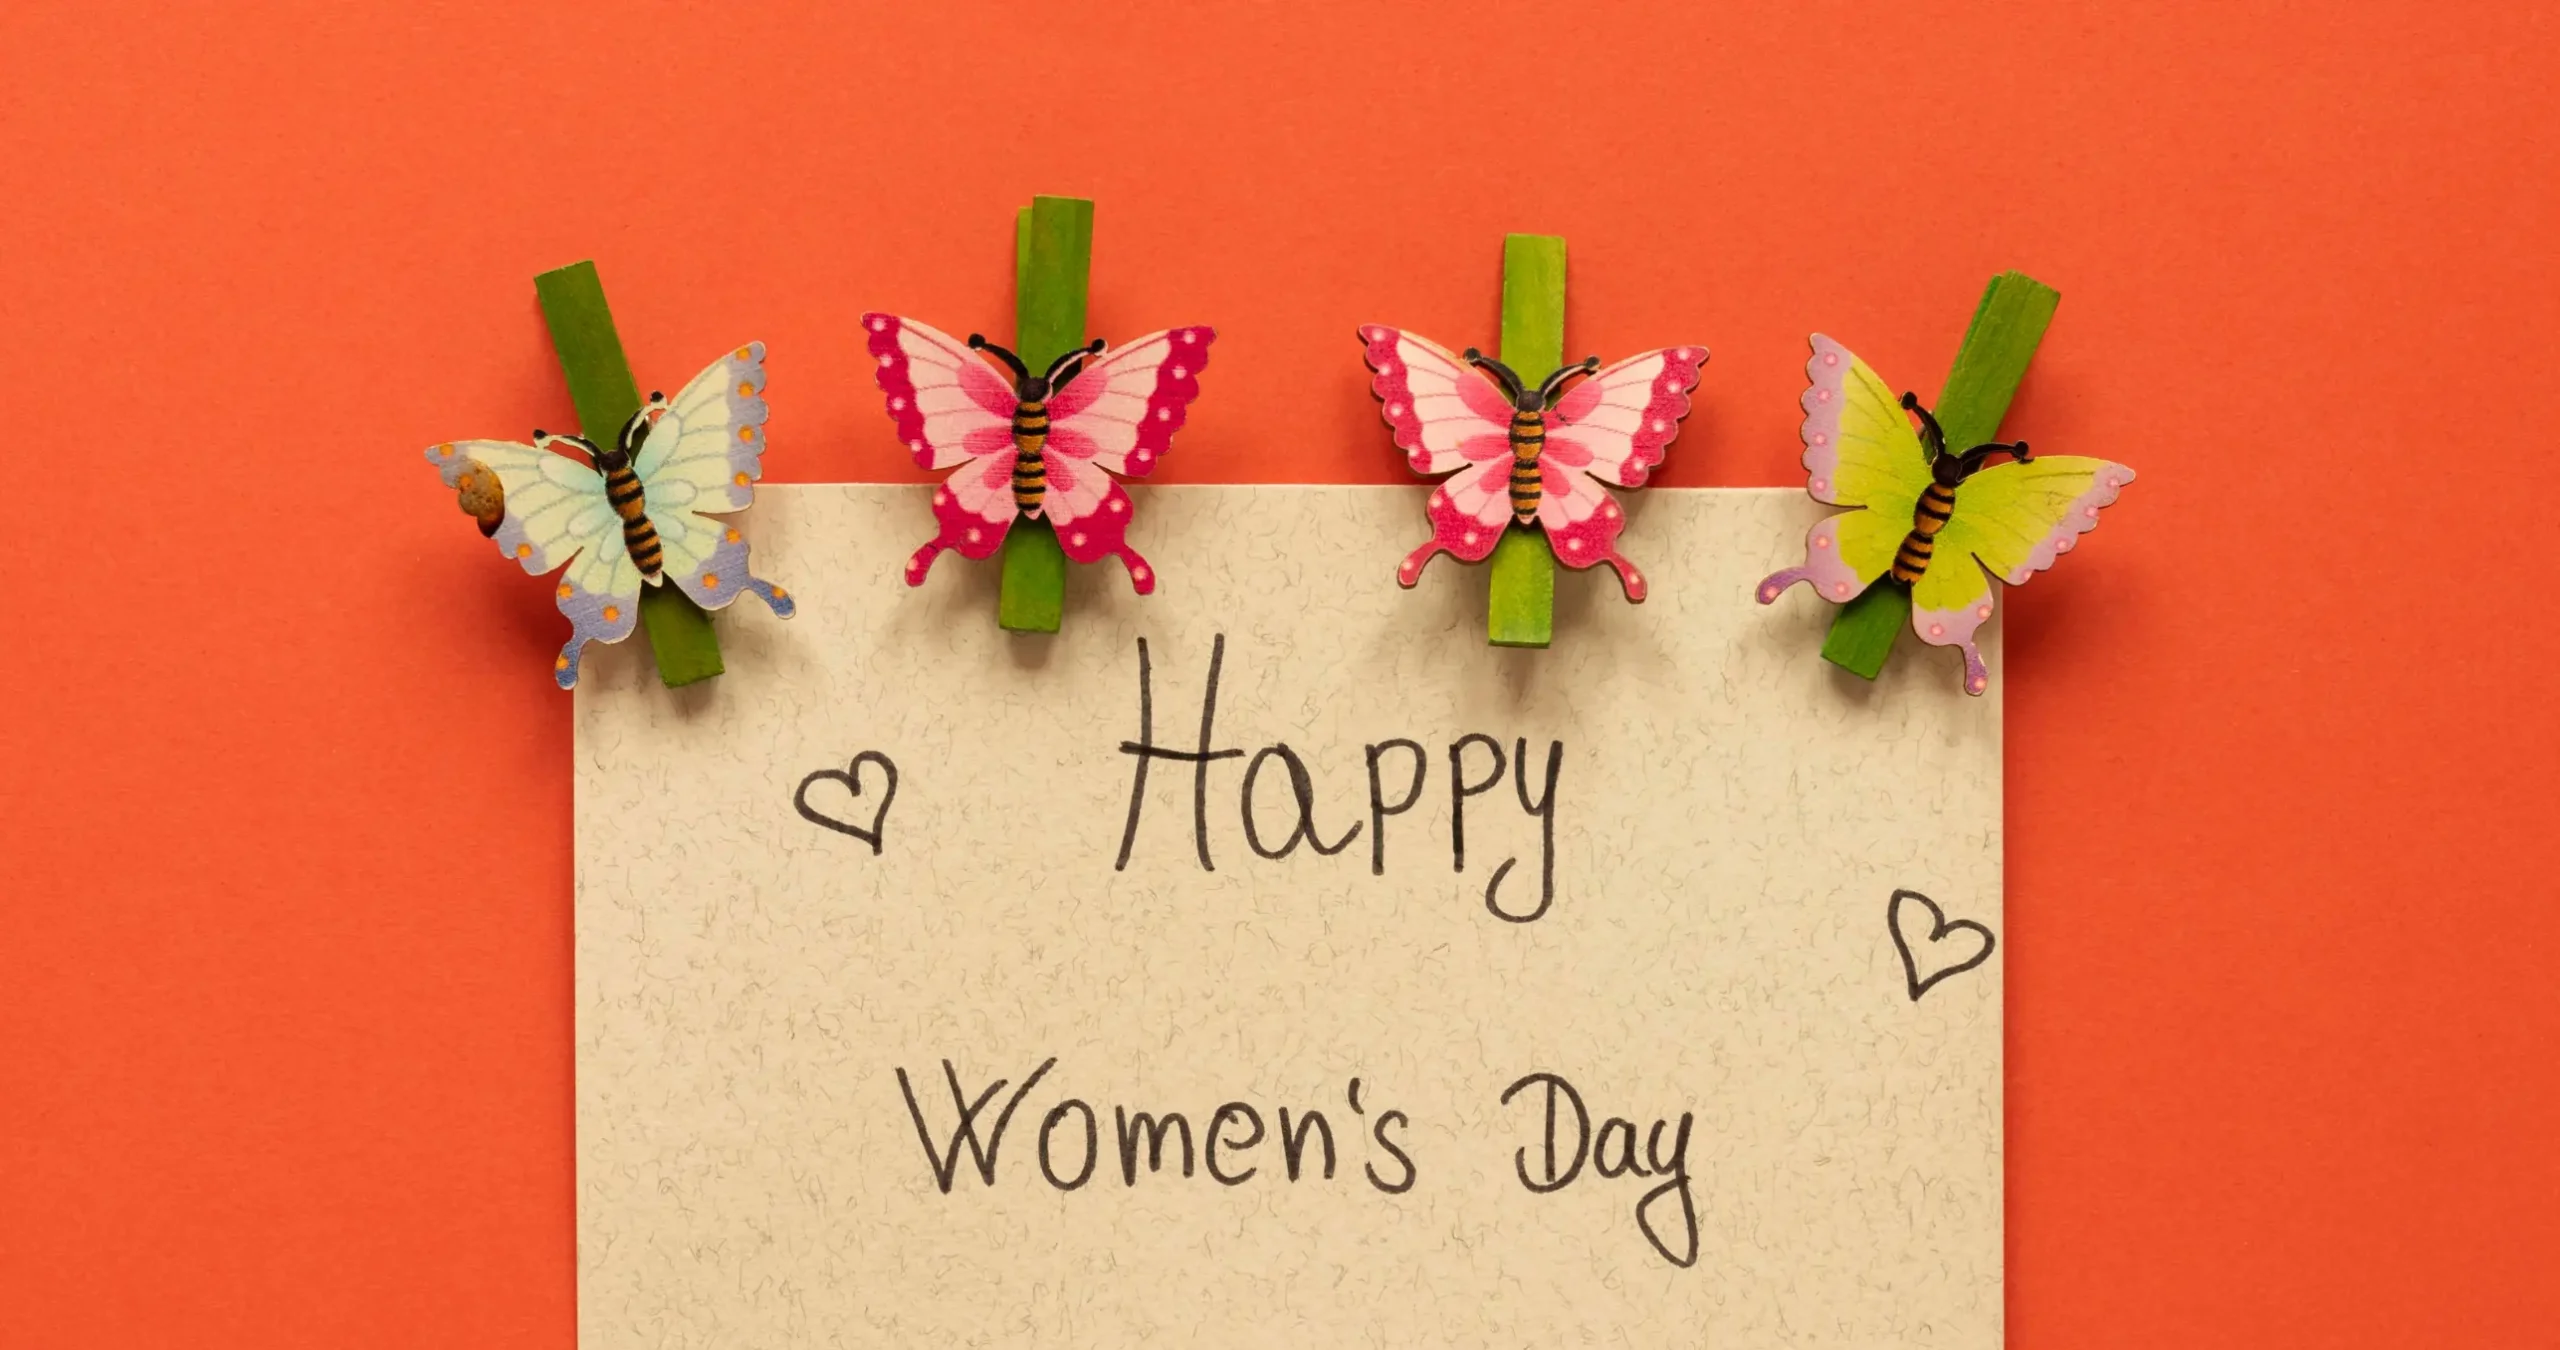 International Women's Day – Here's to Strong Women